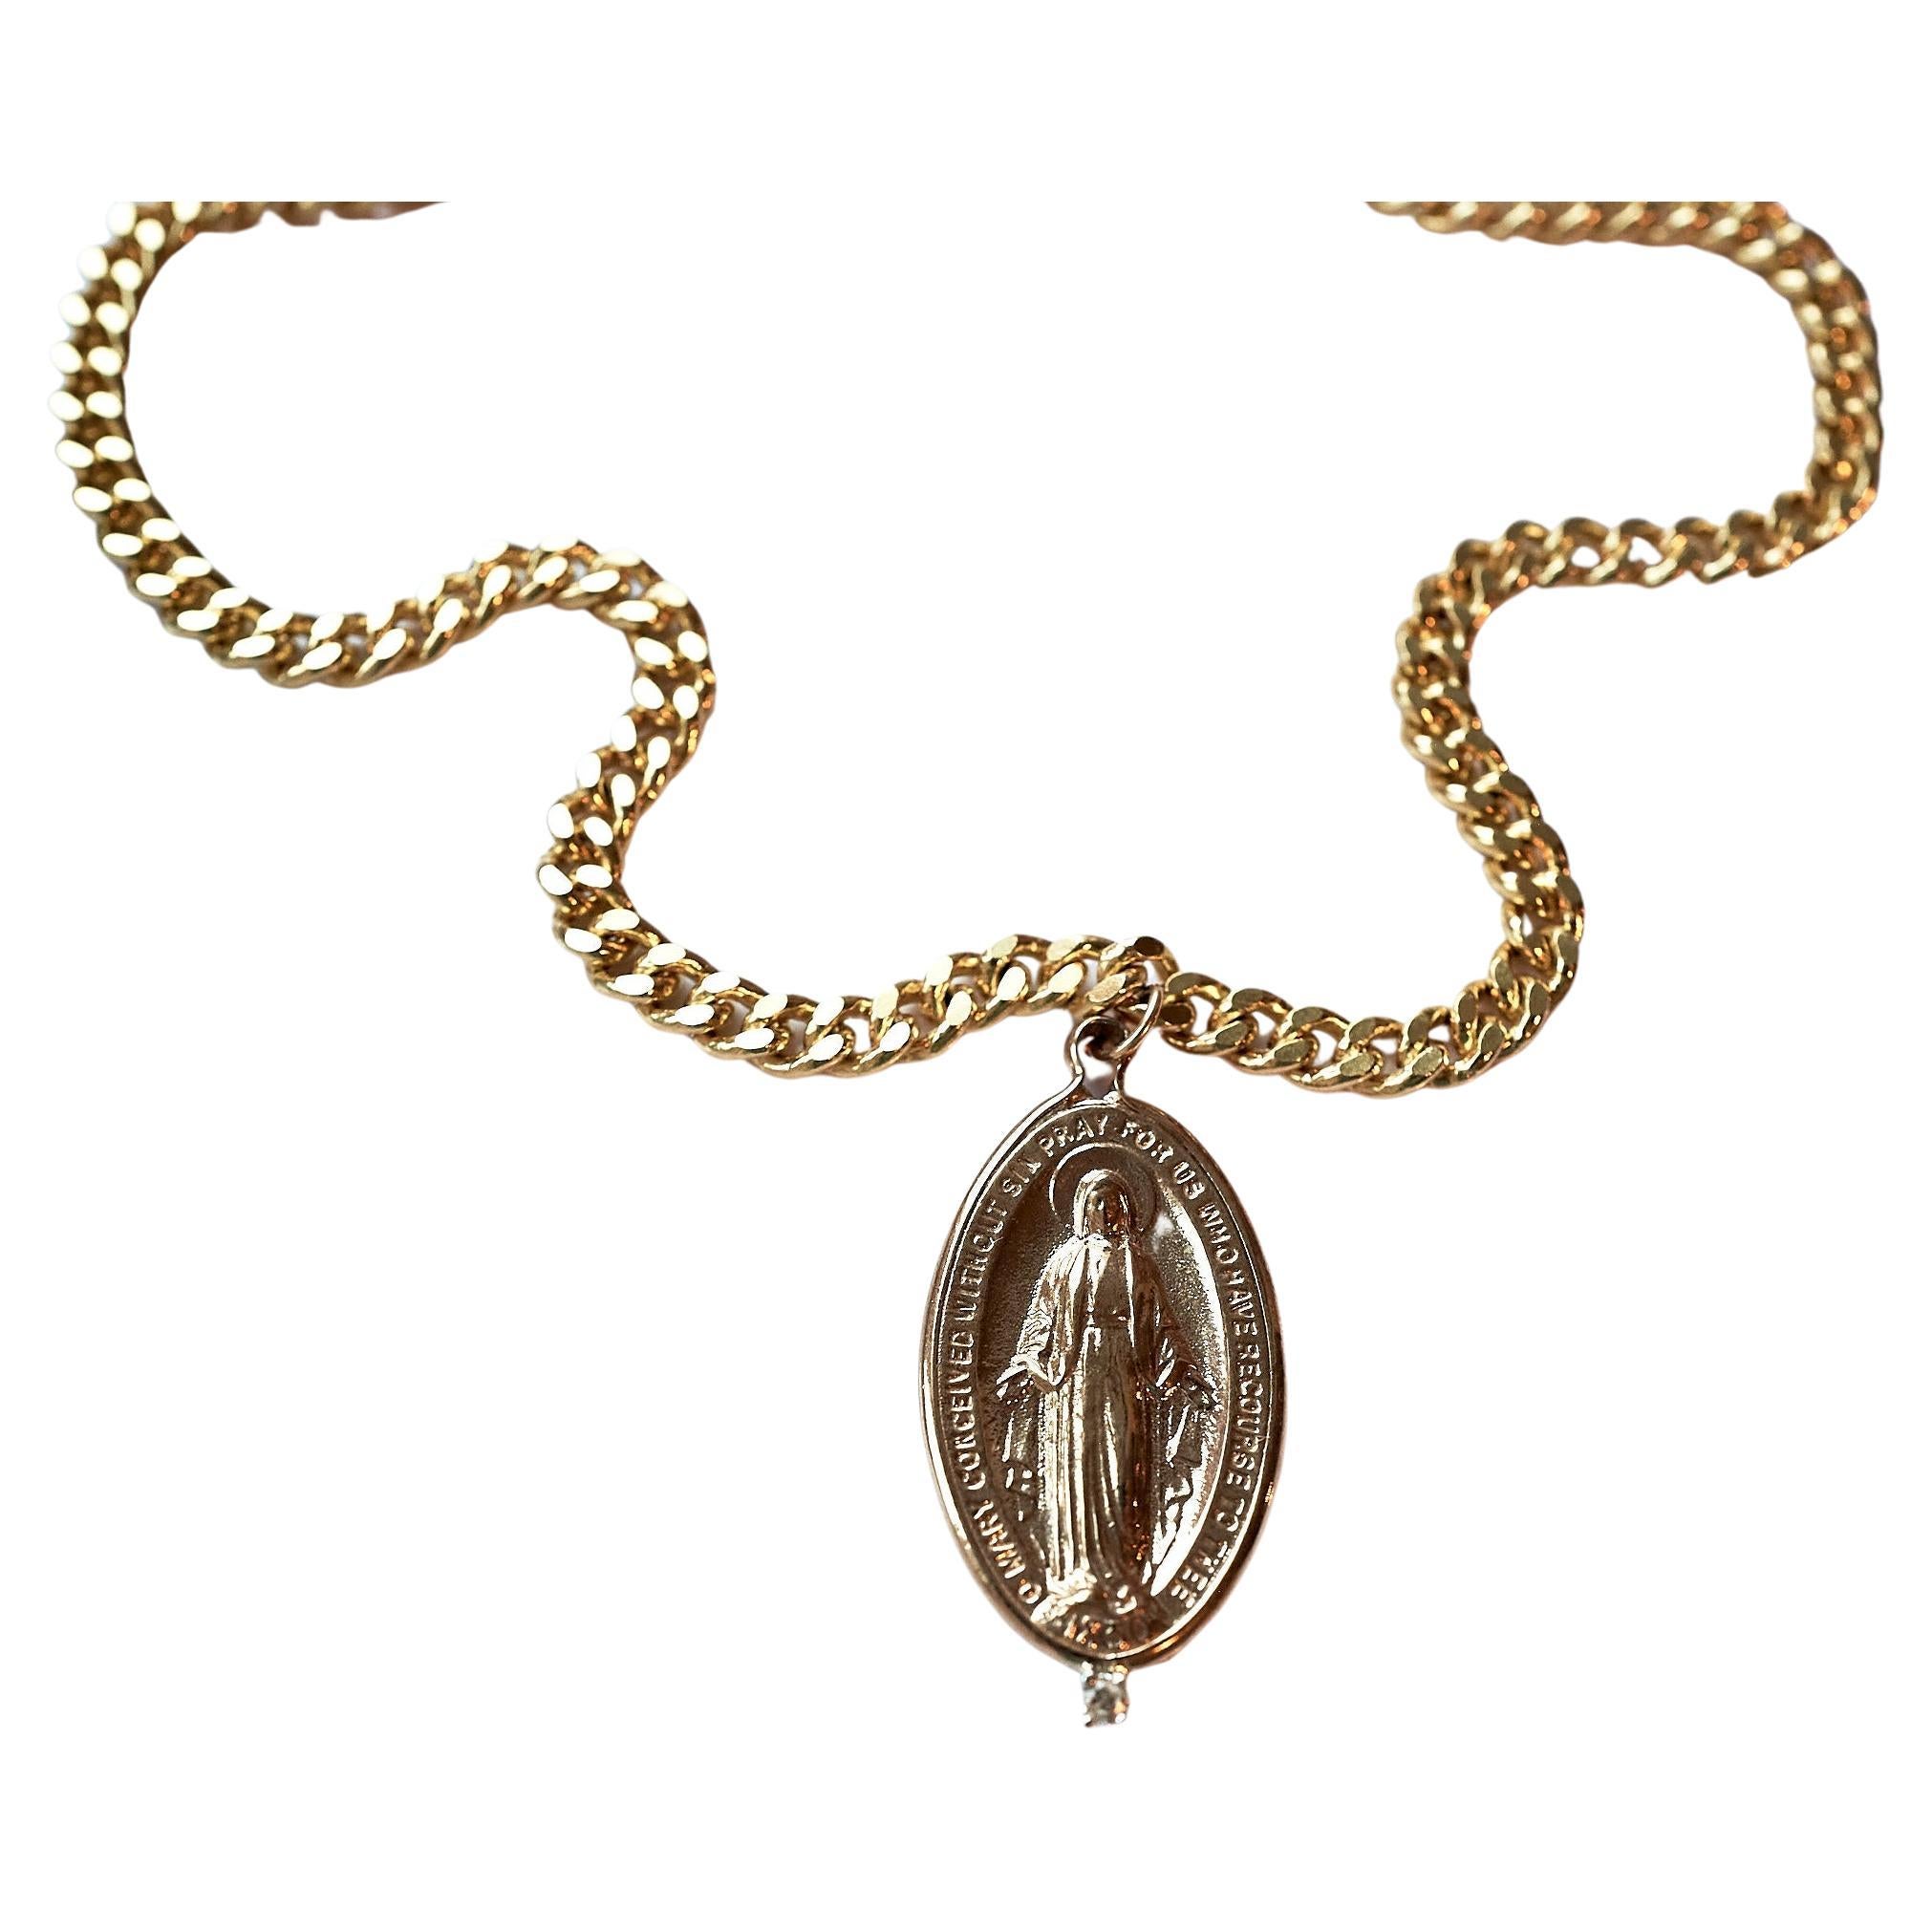 Contemporary White Medal Virgin Mary Oval Medal Chain Necklace J Dauphin For Sale